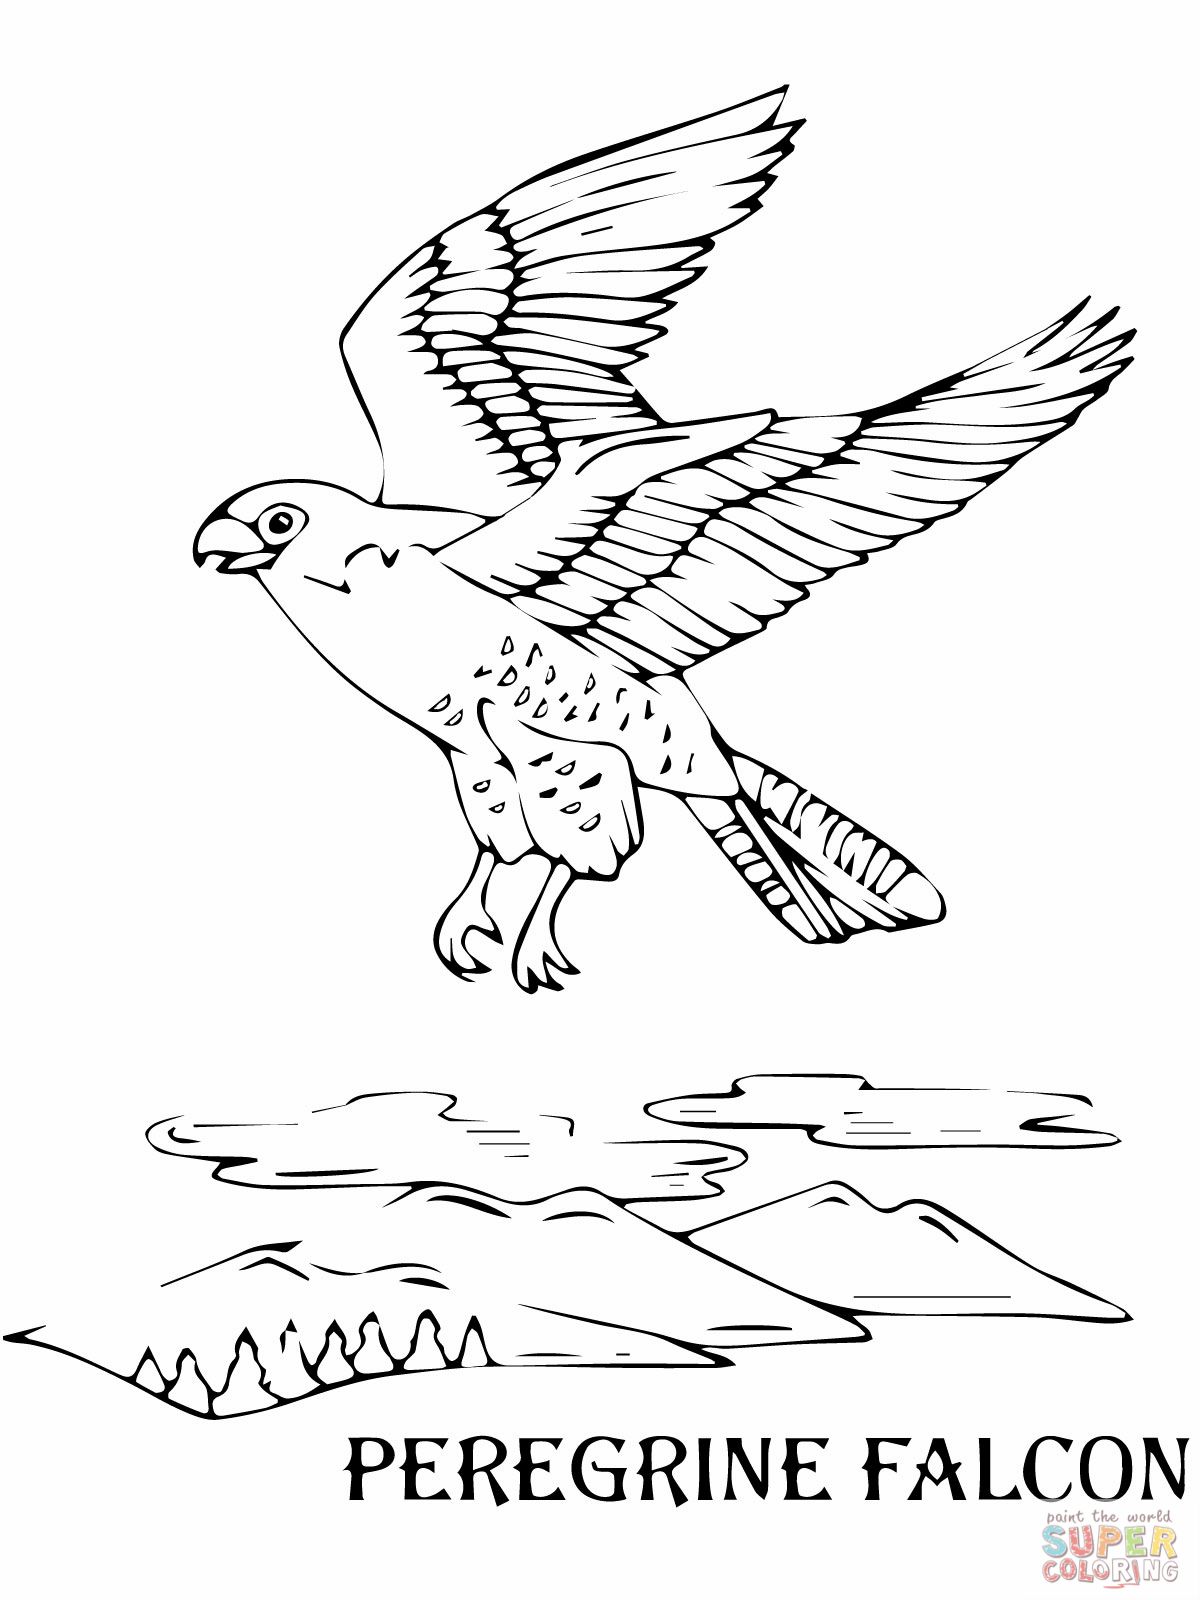 Flying Peregrine Falcon Coloring Online | Practical Scrappers | Coloring  pages, Peregrine falcon, Bird coloring pages